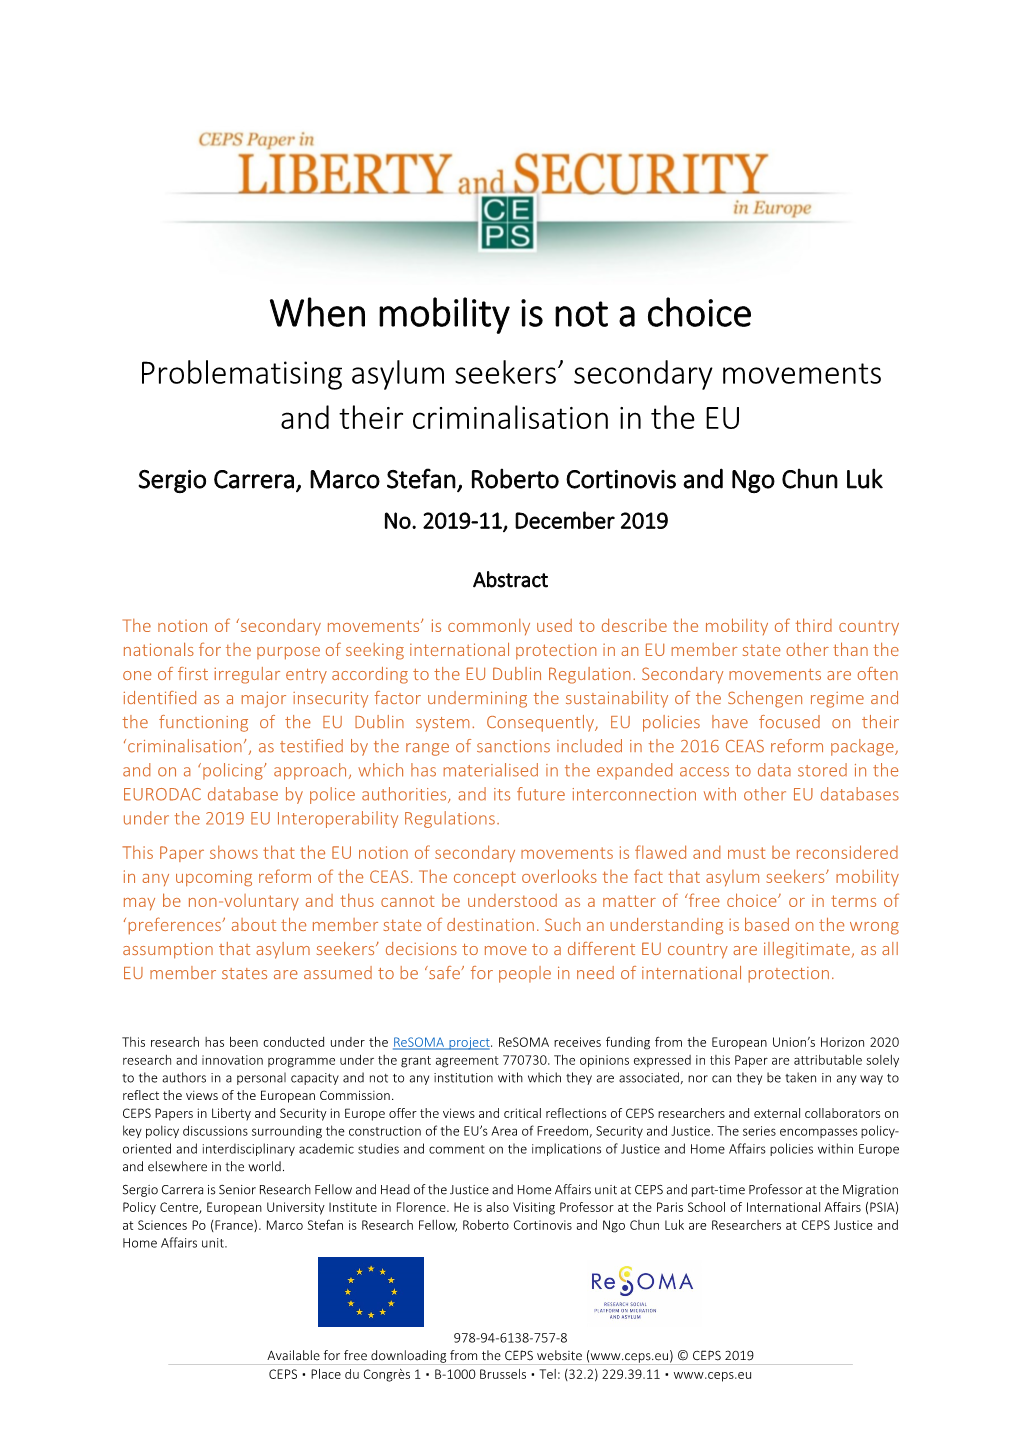 When Mobility Is Not a Choice Problematising Asylum Seekers’ Secondary Movements and Their Criminalisation in the EU